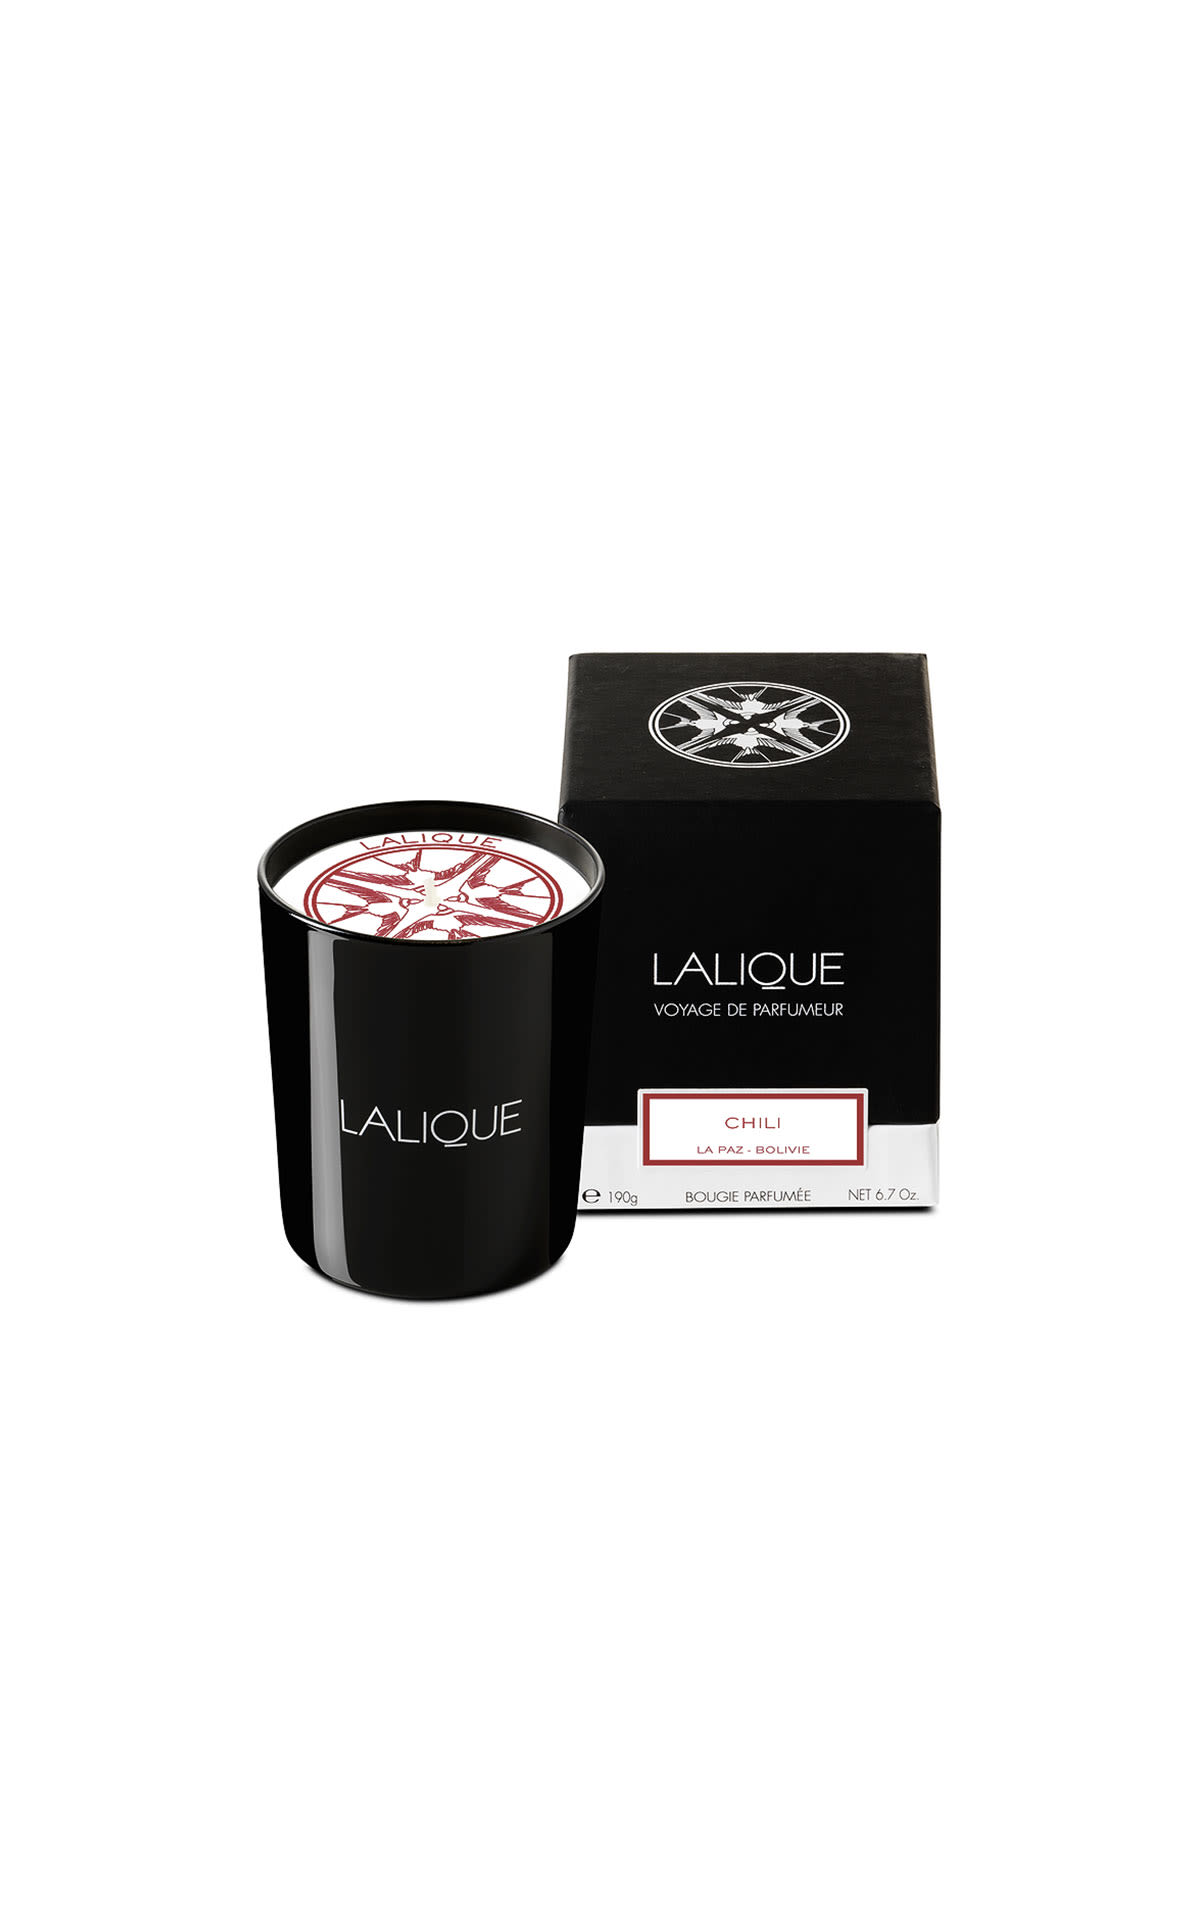 Lalique Chili safran osmanthus candle from Bicester Village